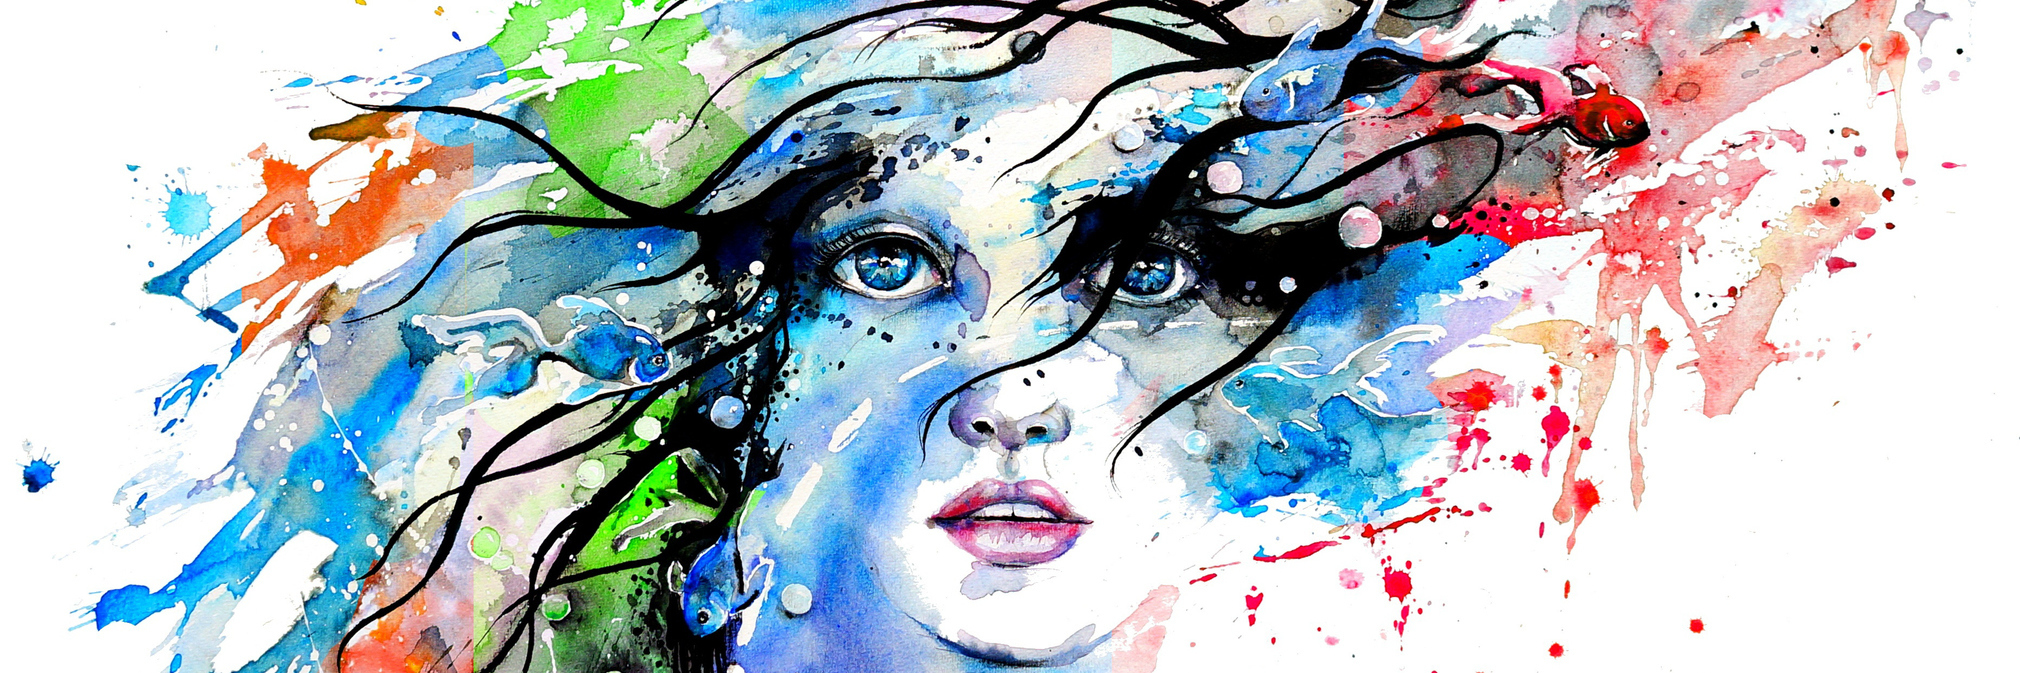 A watercolor illustration of a woman, with paint splashed around the face.